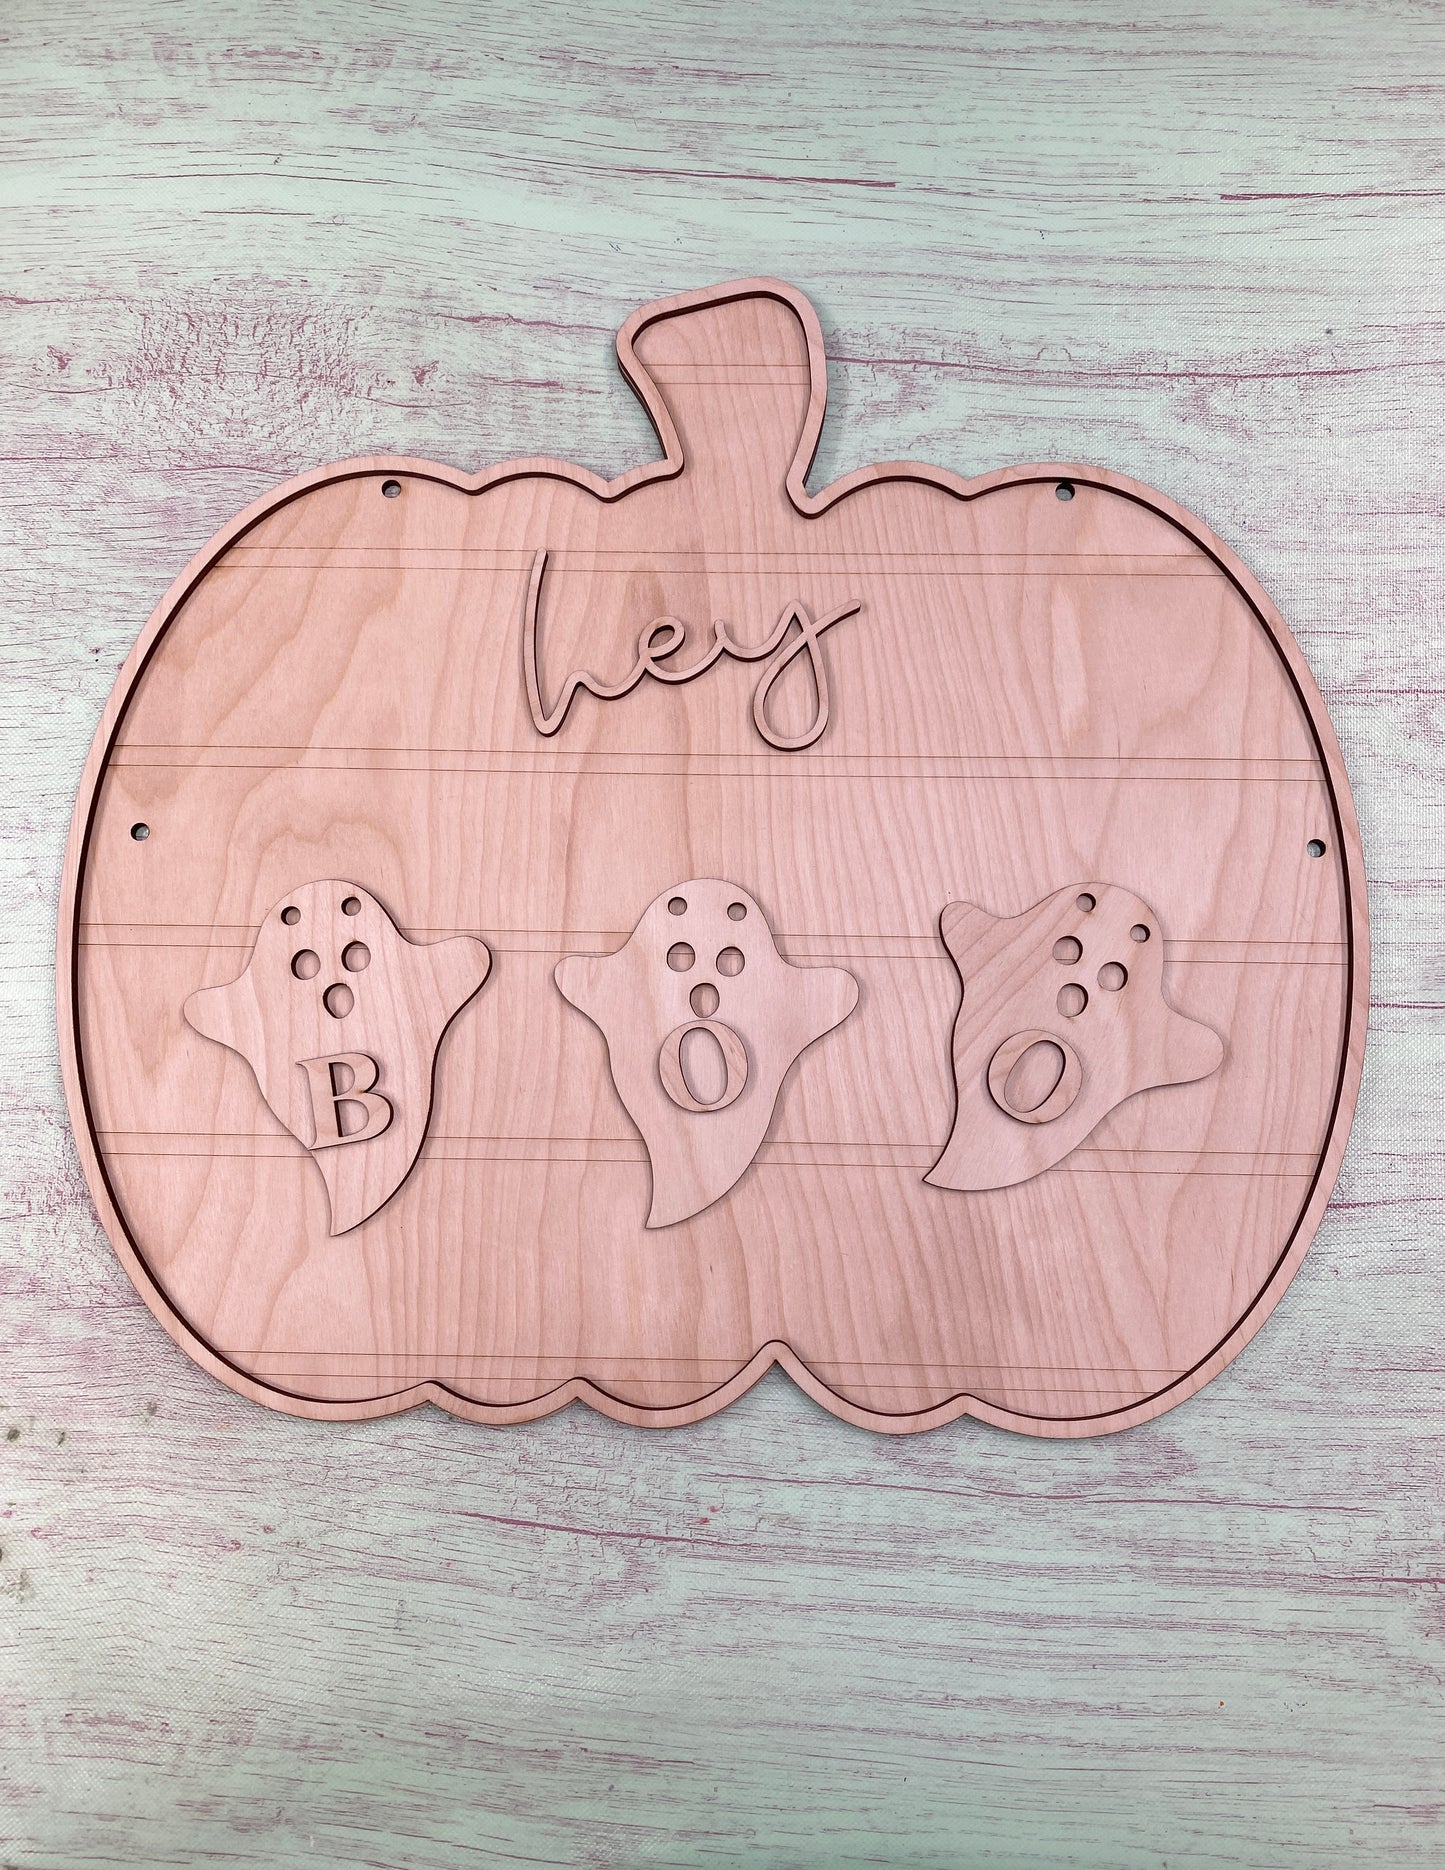 Hey Boo Shiplapped Pumpkin with Garland Layered Sign / Laser Cut Door Hanger / Blanks for DIY Project